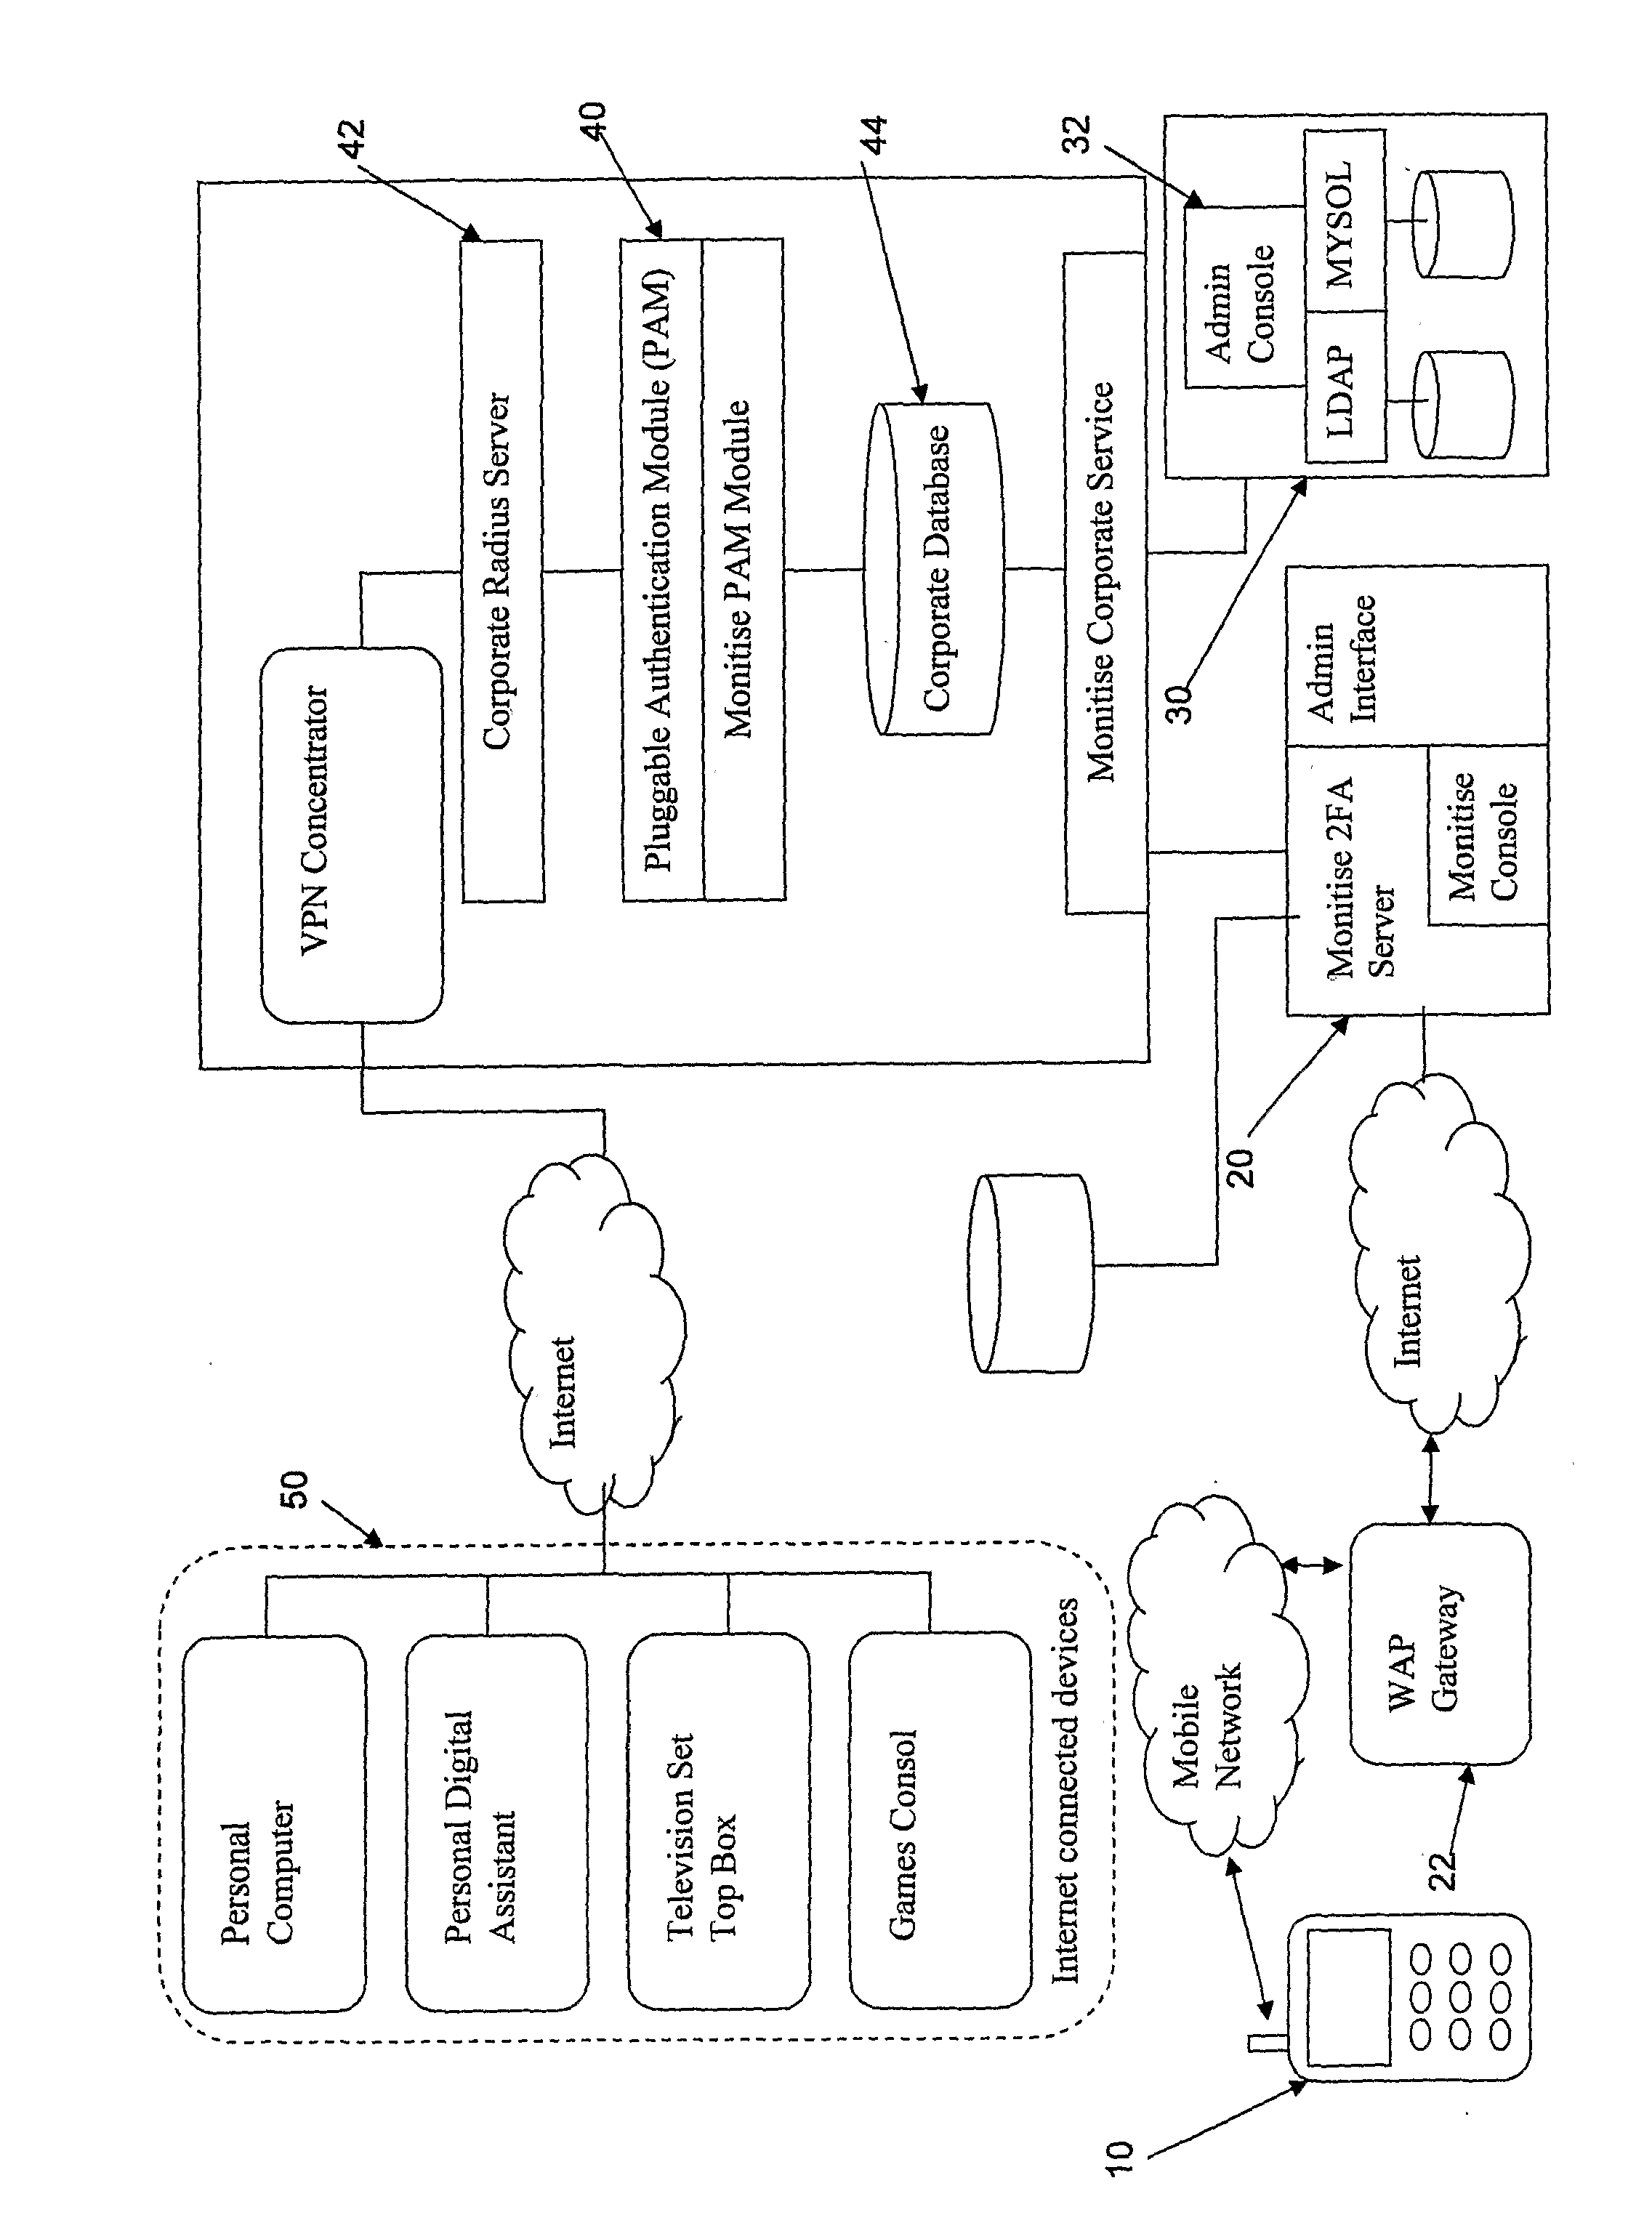 Electronic System for Securing Electronic Services